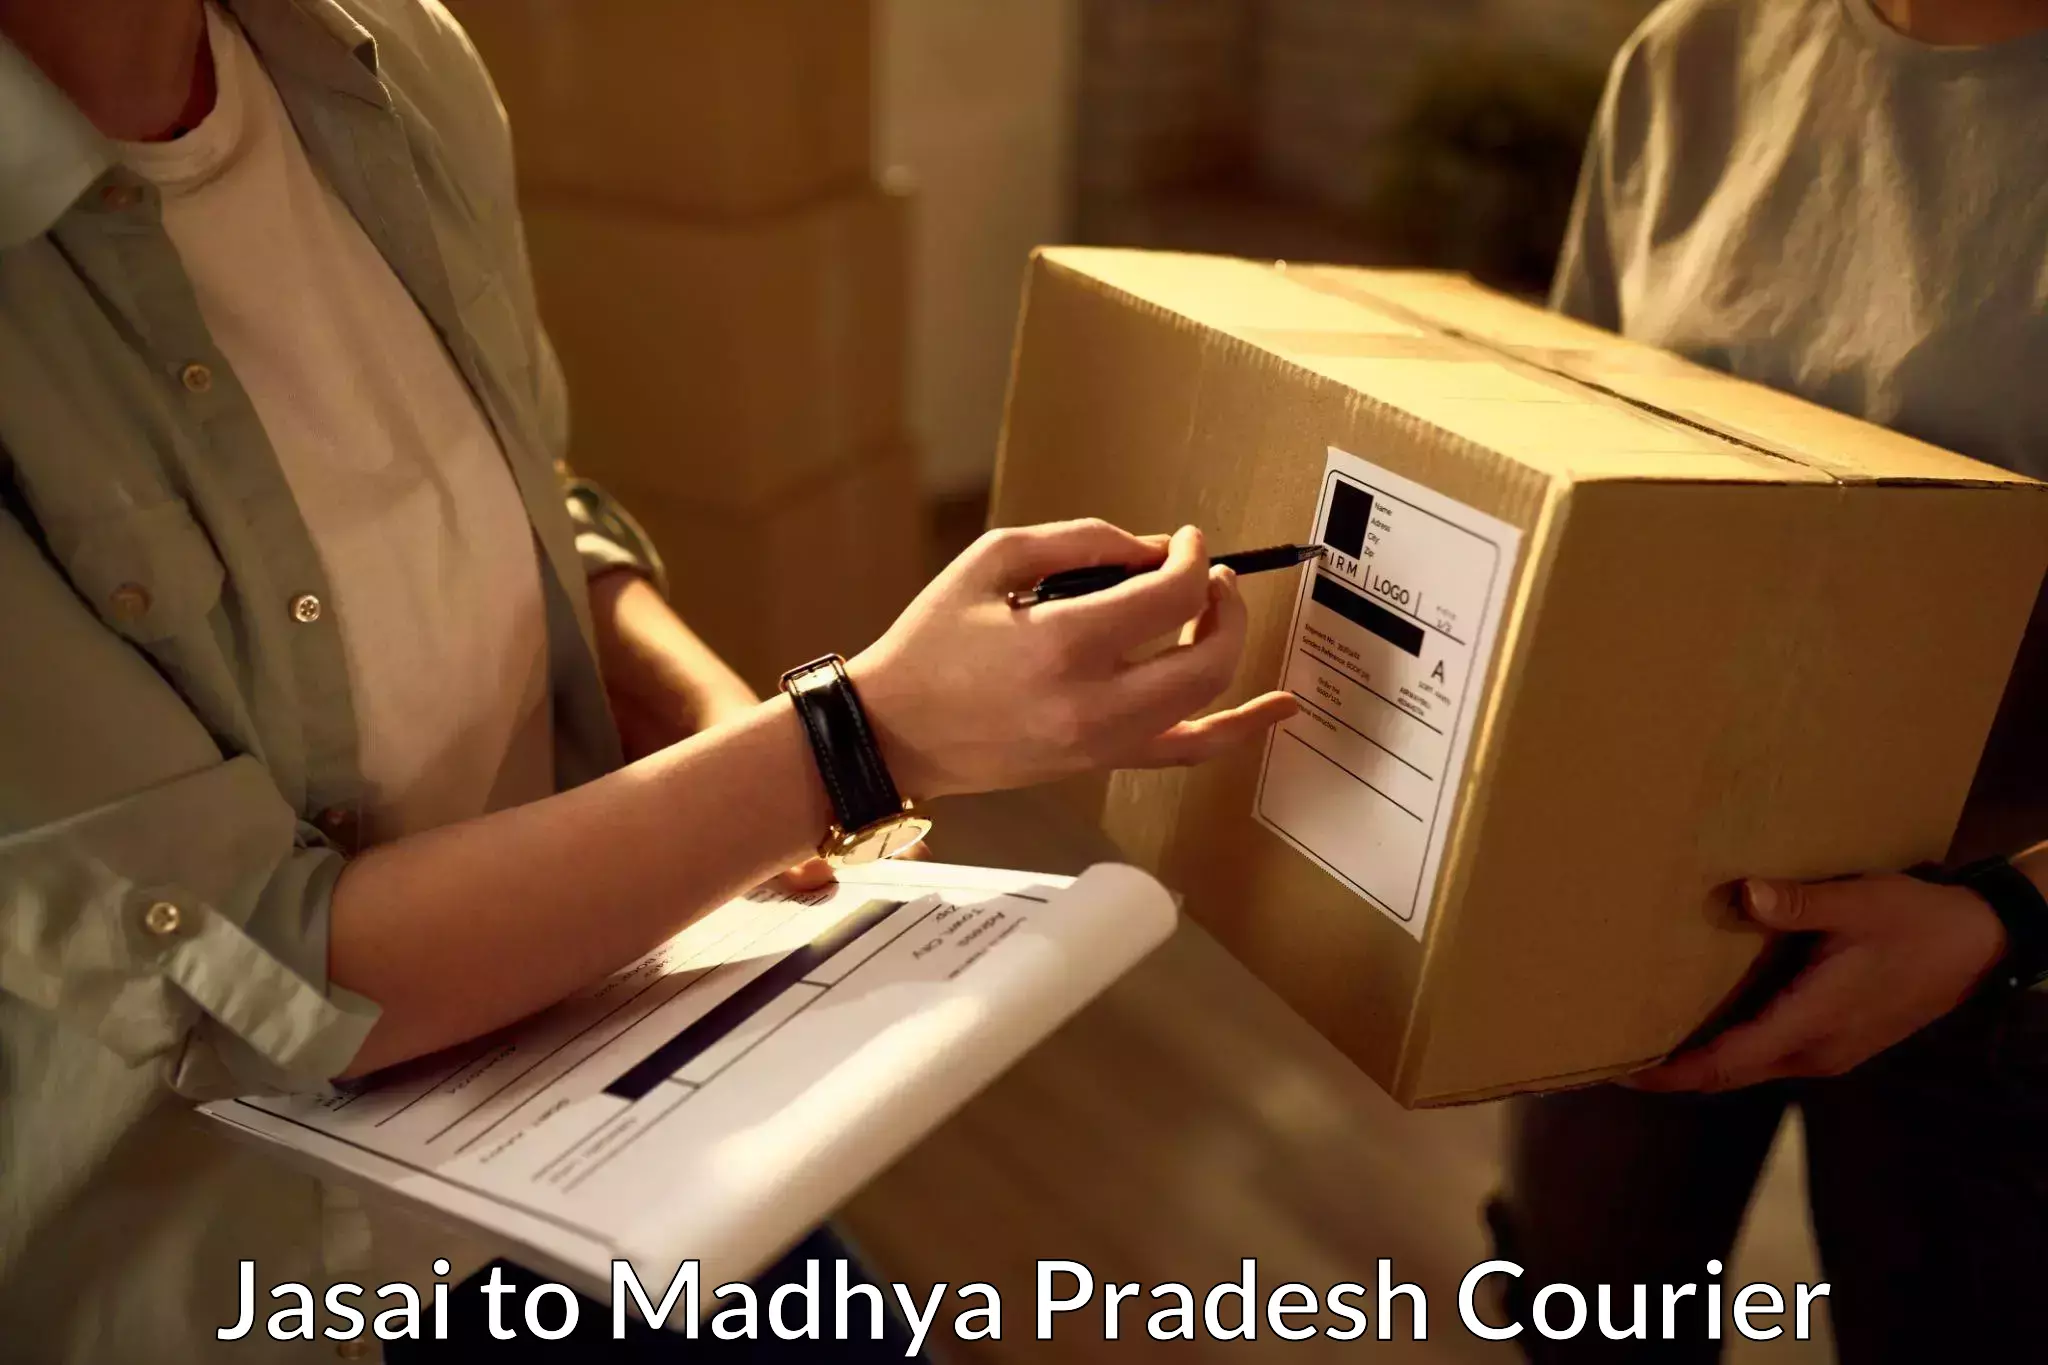 Reliable courier service Jasai to Indore